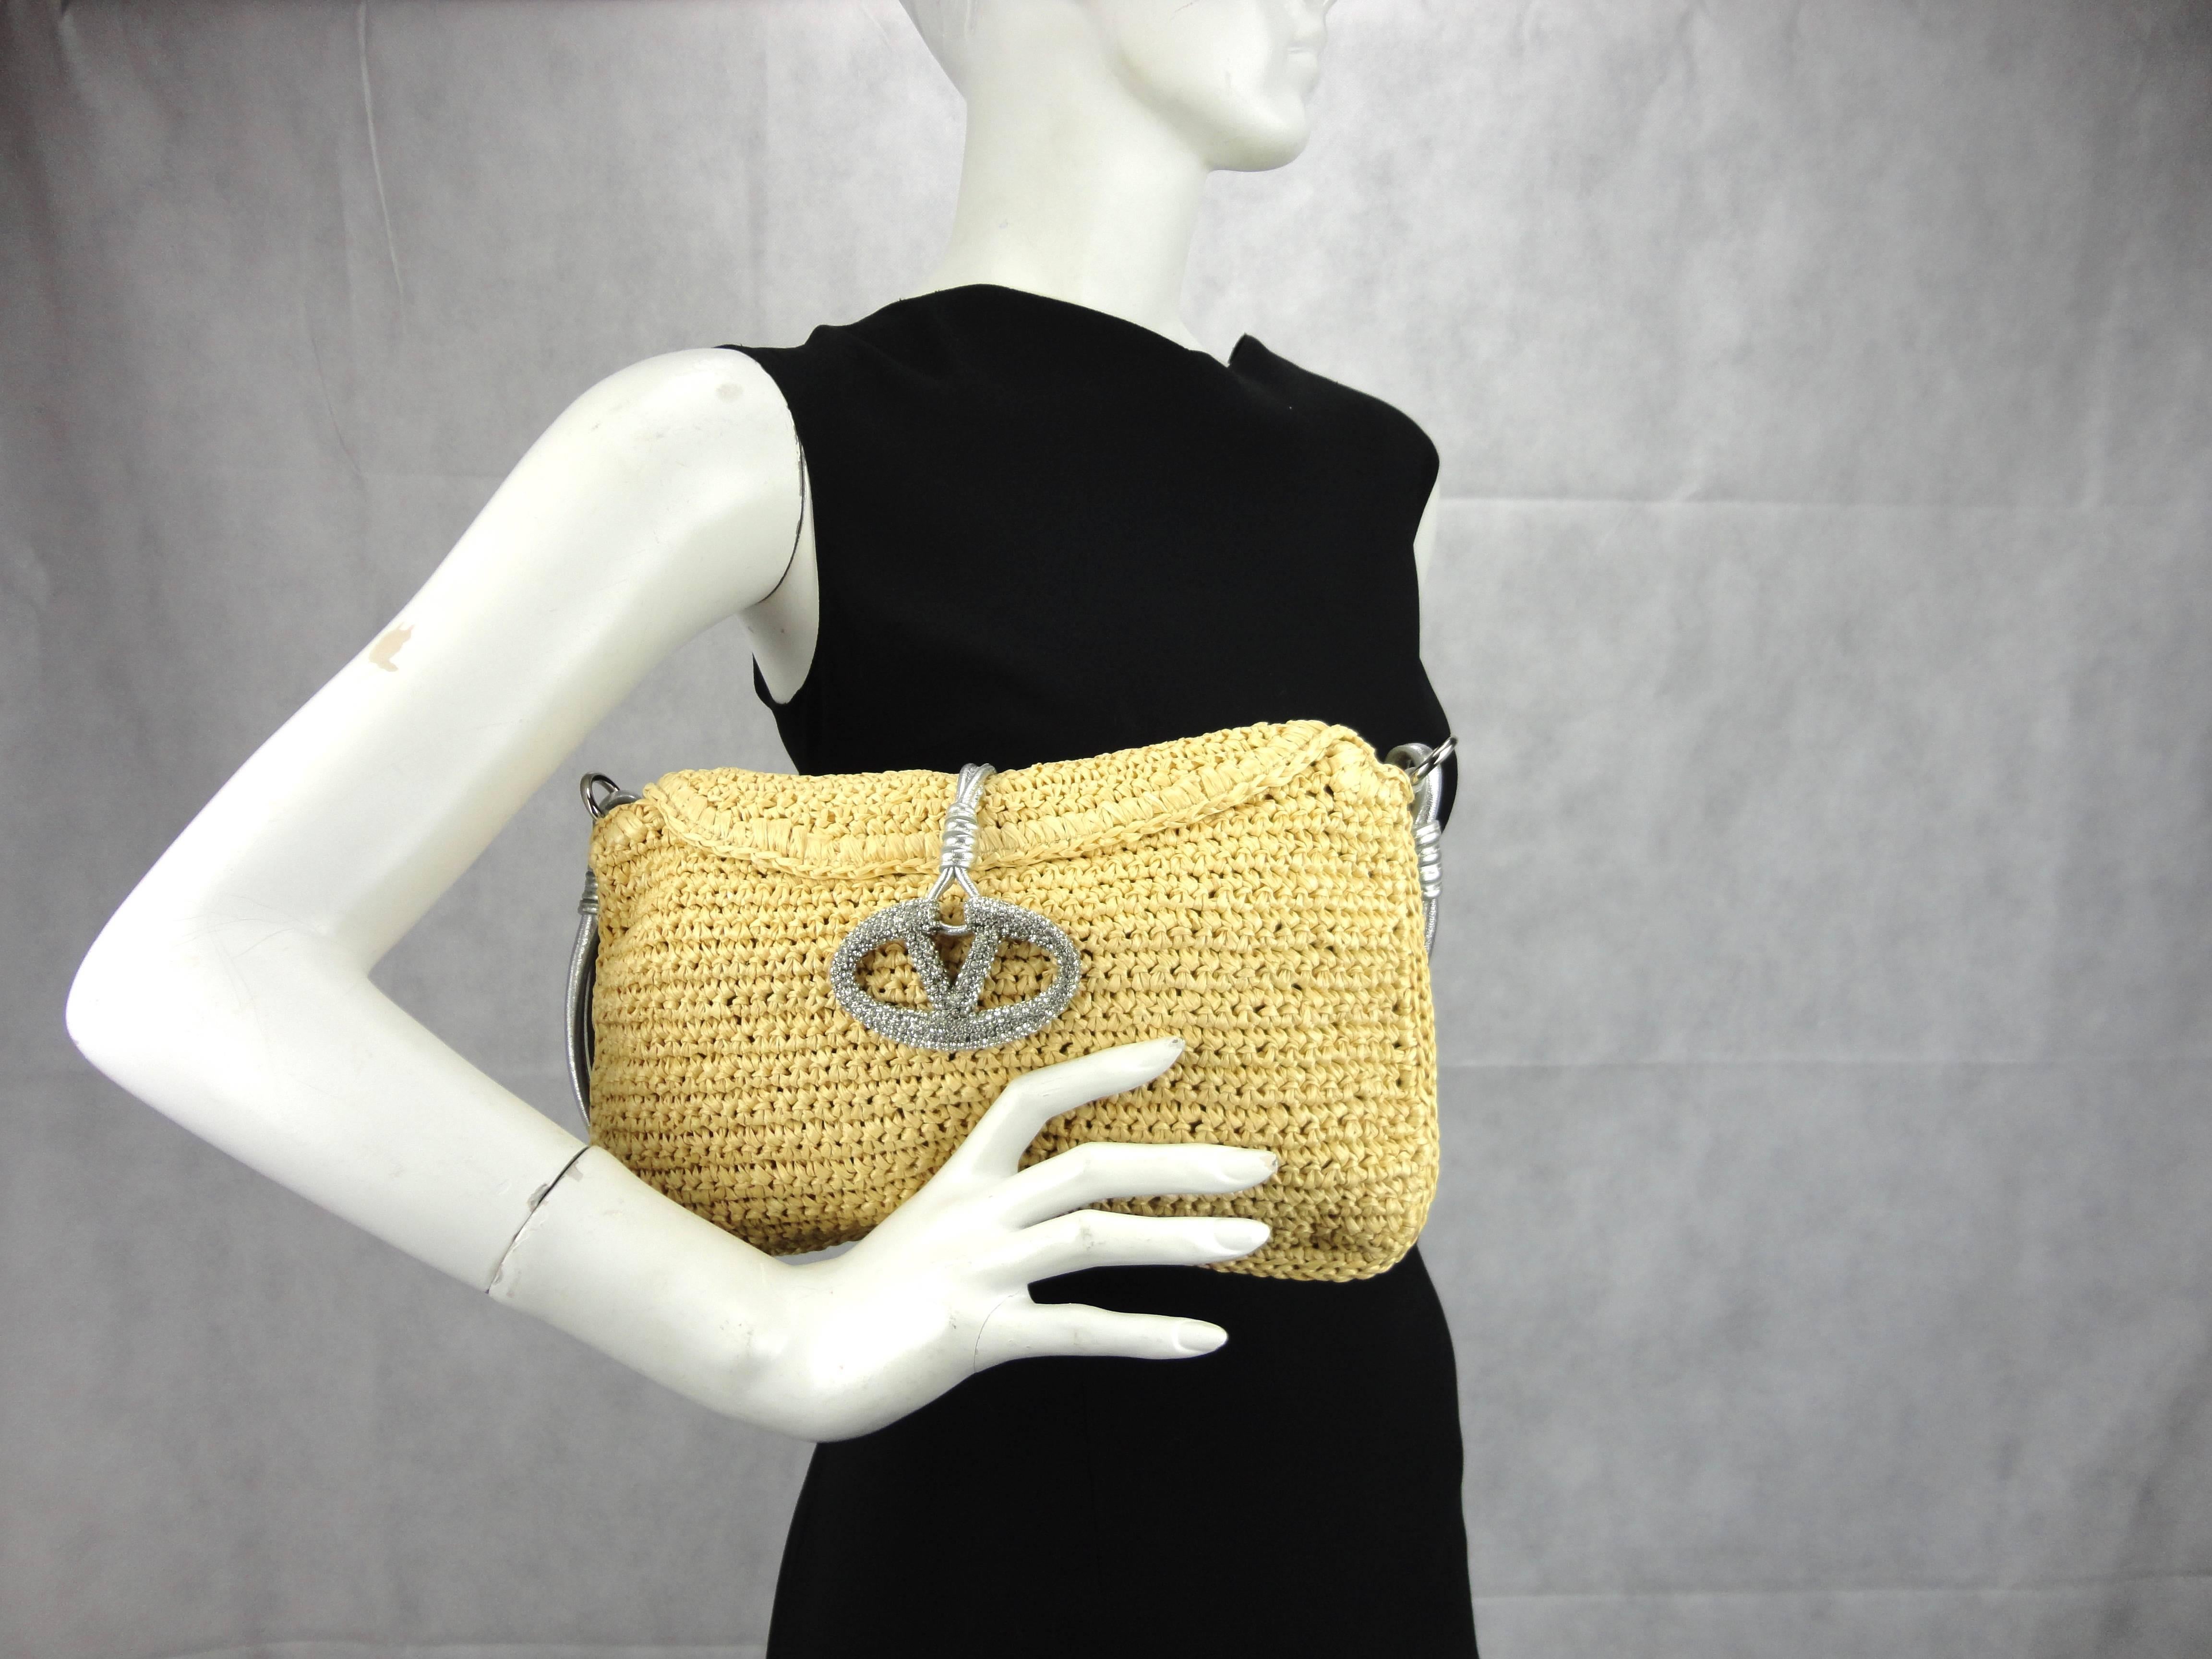 Valentino Tan straw (raffia) bag with silver leather strap and front flap closure with Valentino logo in Strass. Interior zip pocket. Mint condition.

Measures: H 21 cm x W 30 cm 